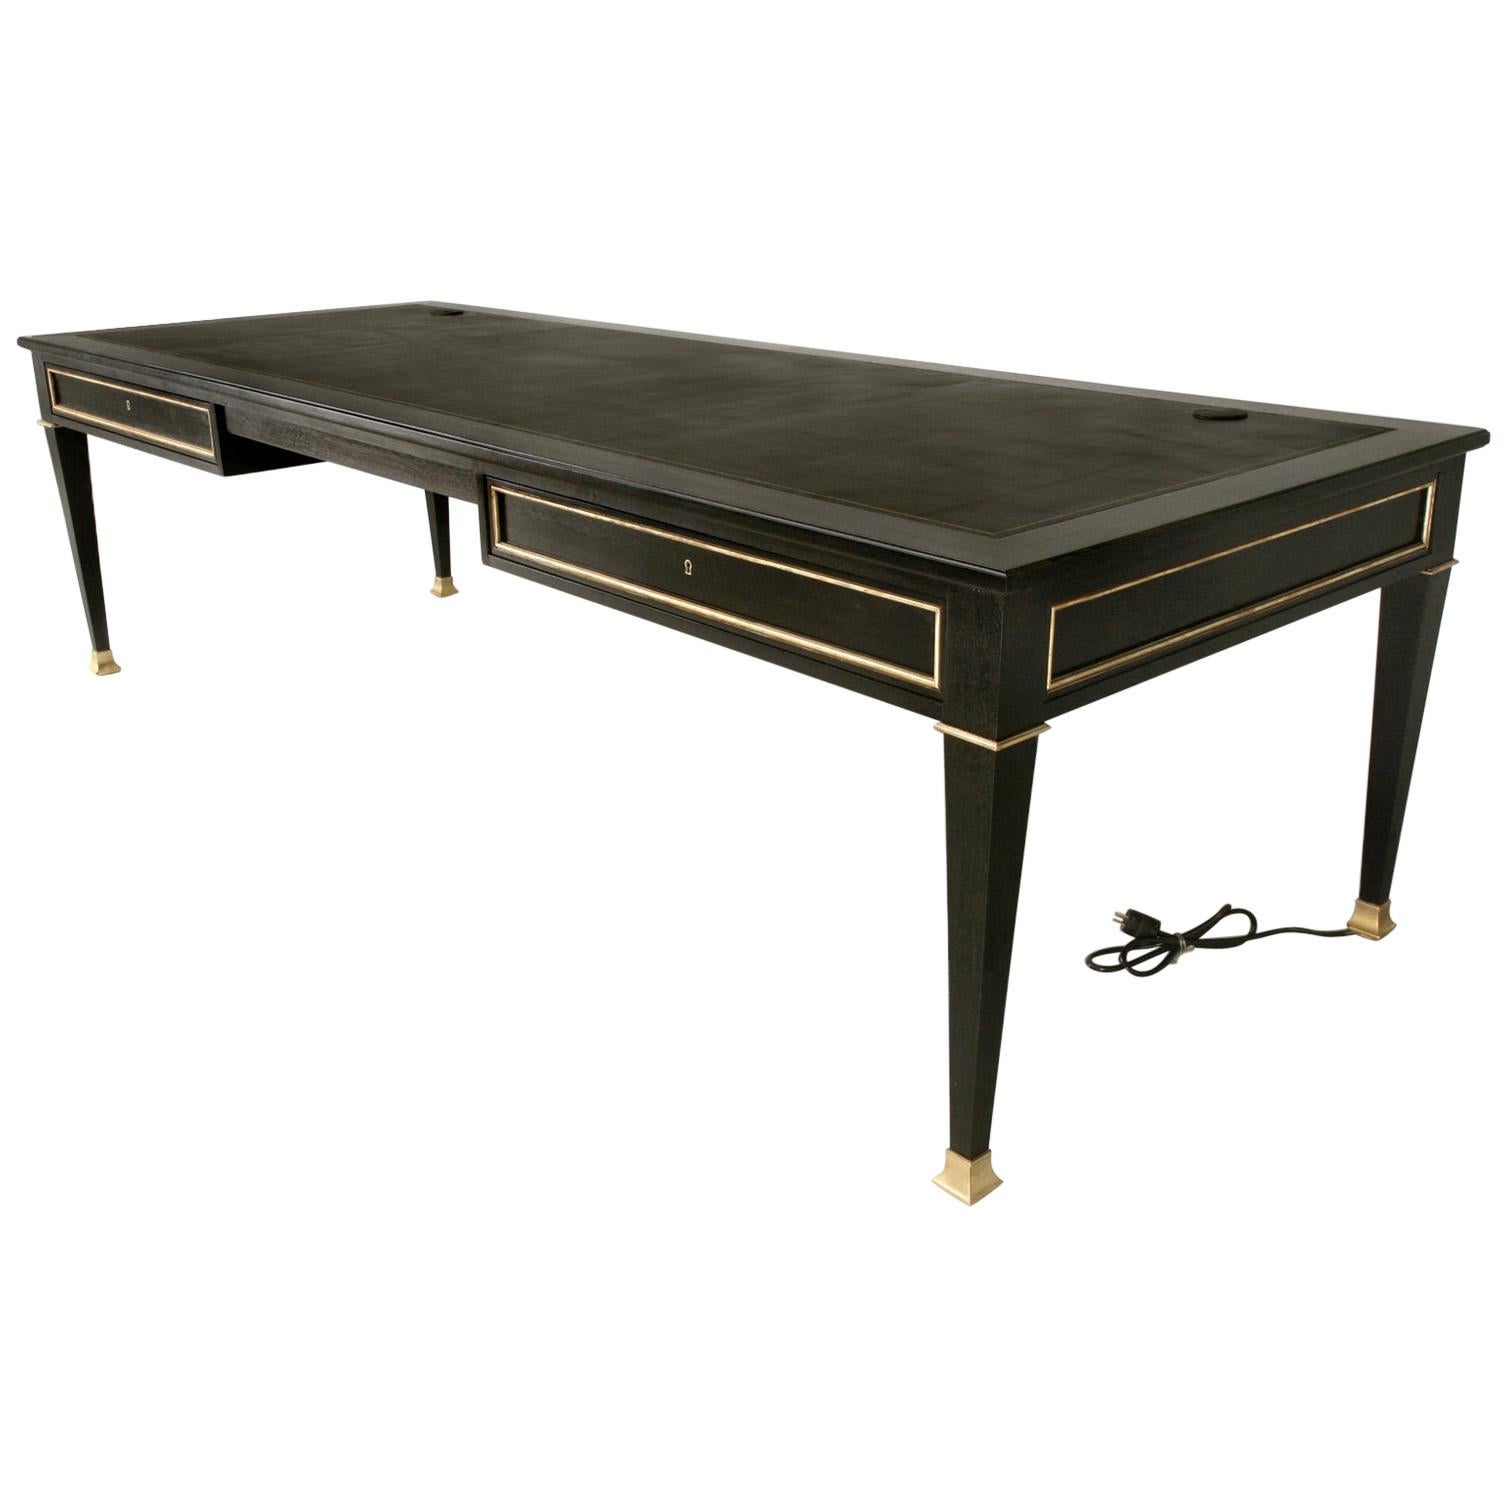 Maison Jansen Inspired French Louis XVI Ebonized Desk Available in Any Dimension